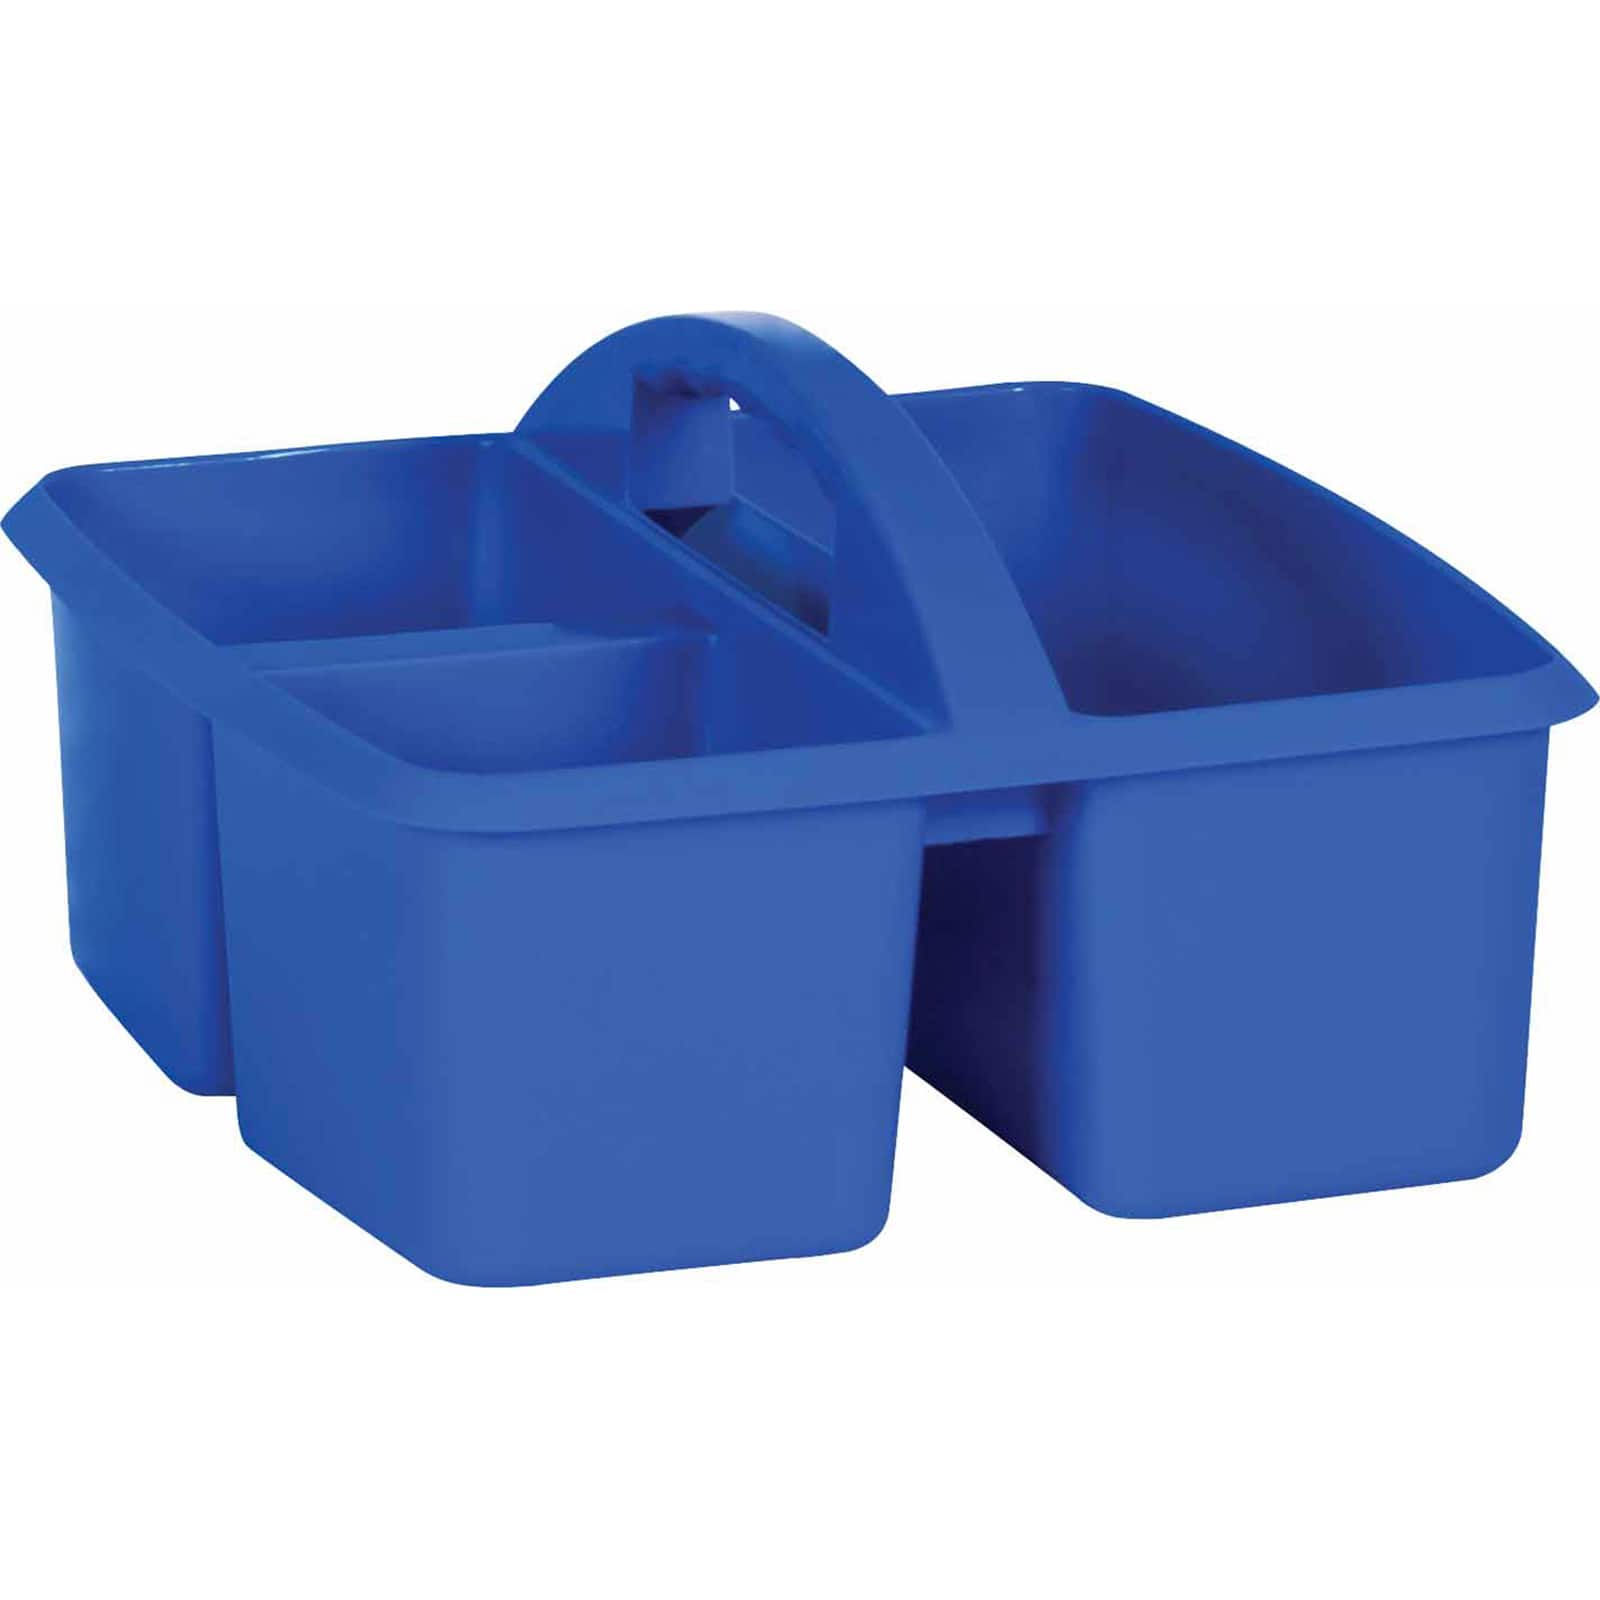 Purchase the Teacher Created Resources Plastic Storage Caddy, 6ct. at Michaels.com